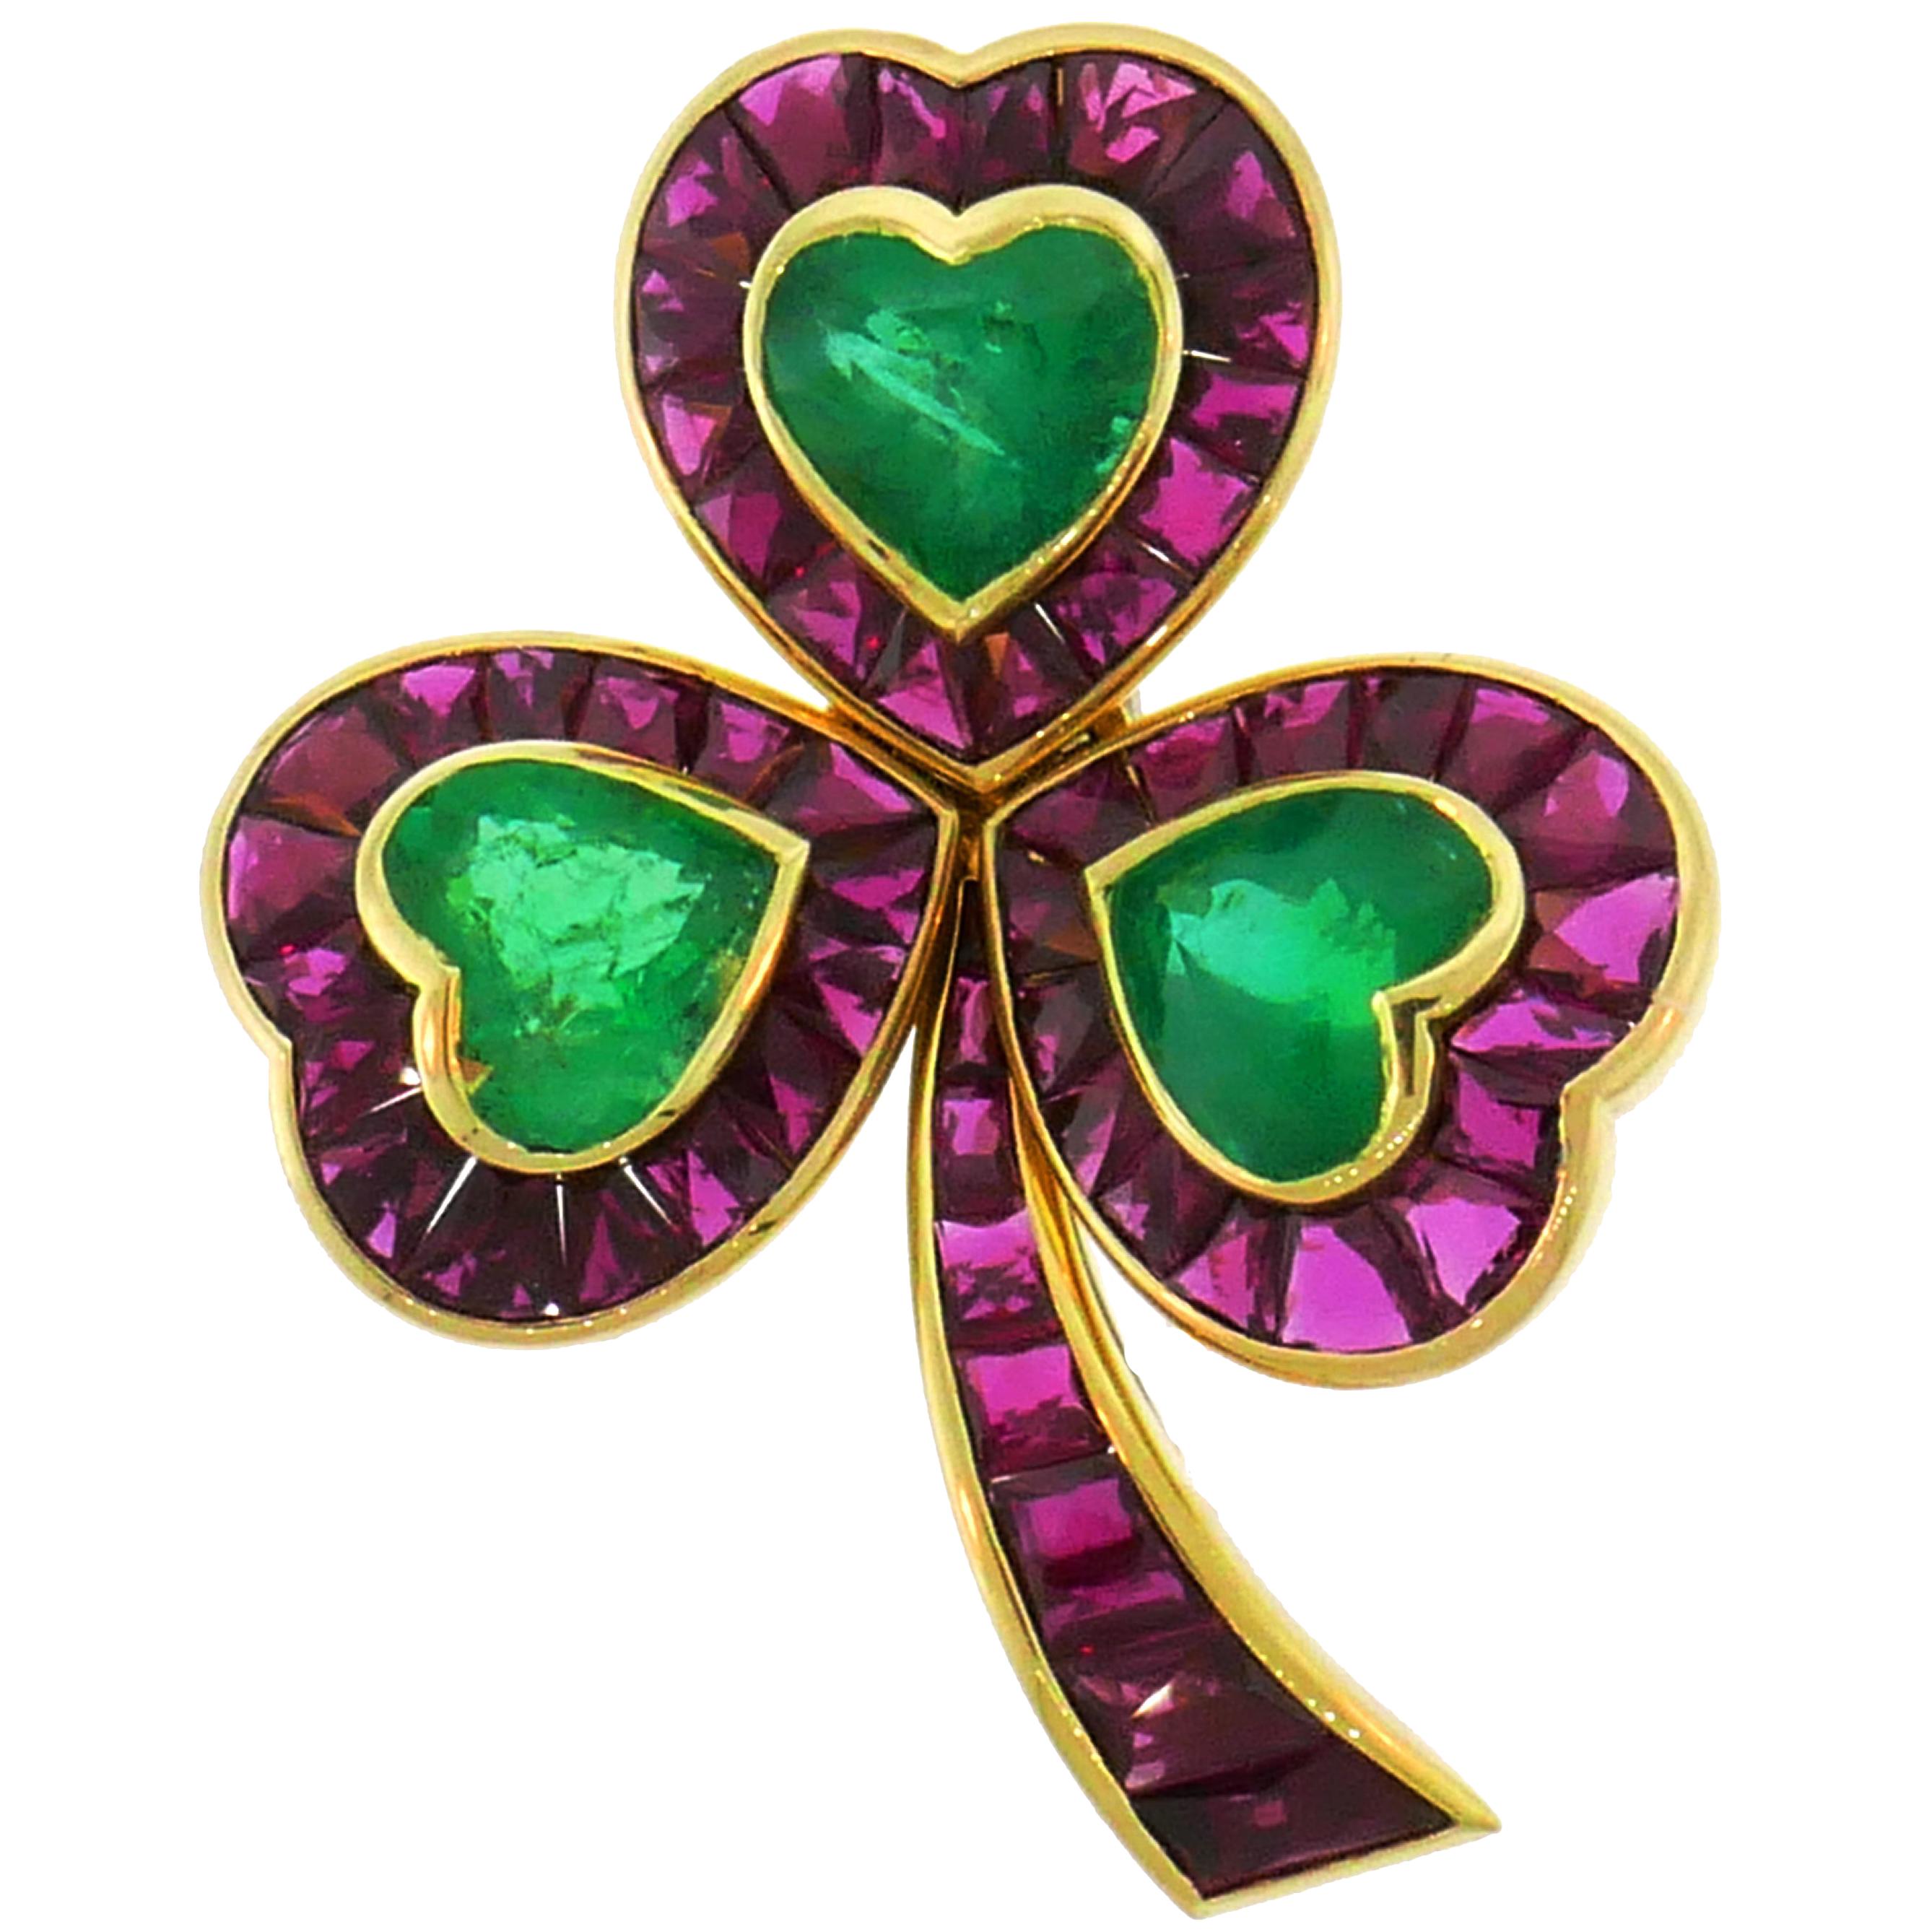 Hemmerle Ruby Emerald Gold Clover Clip Pin Brooch For Sale